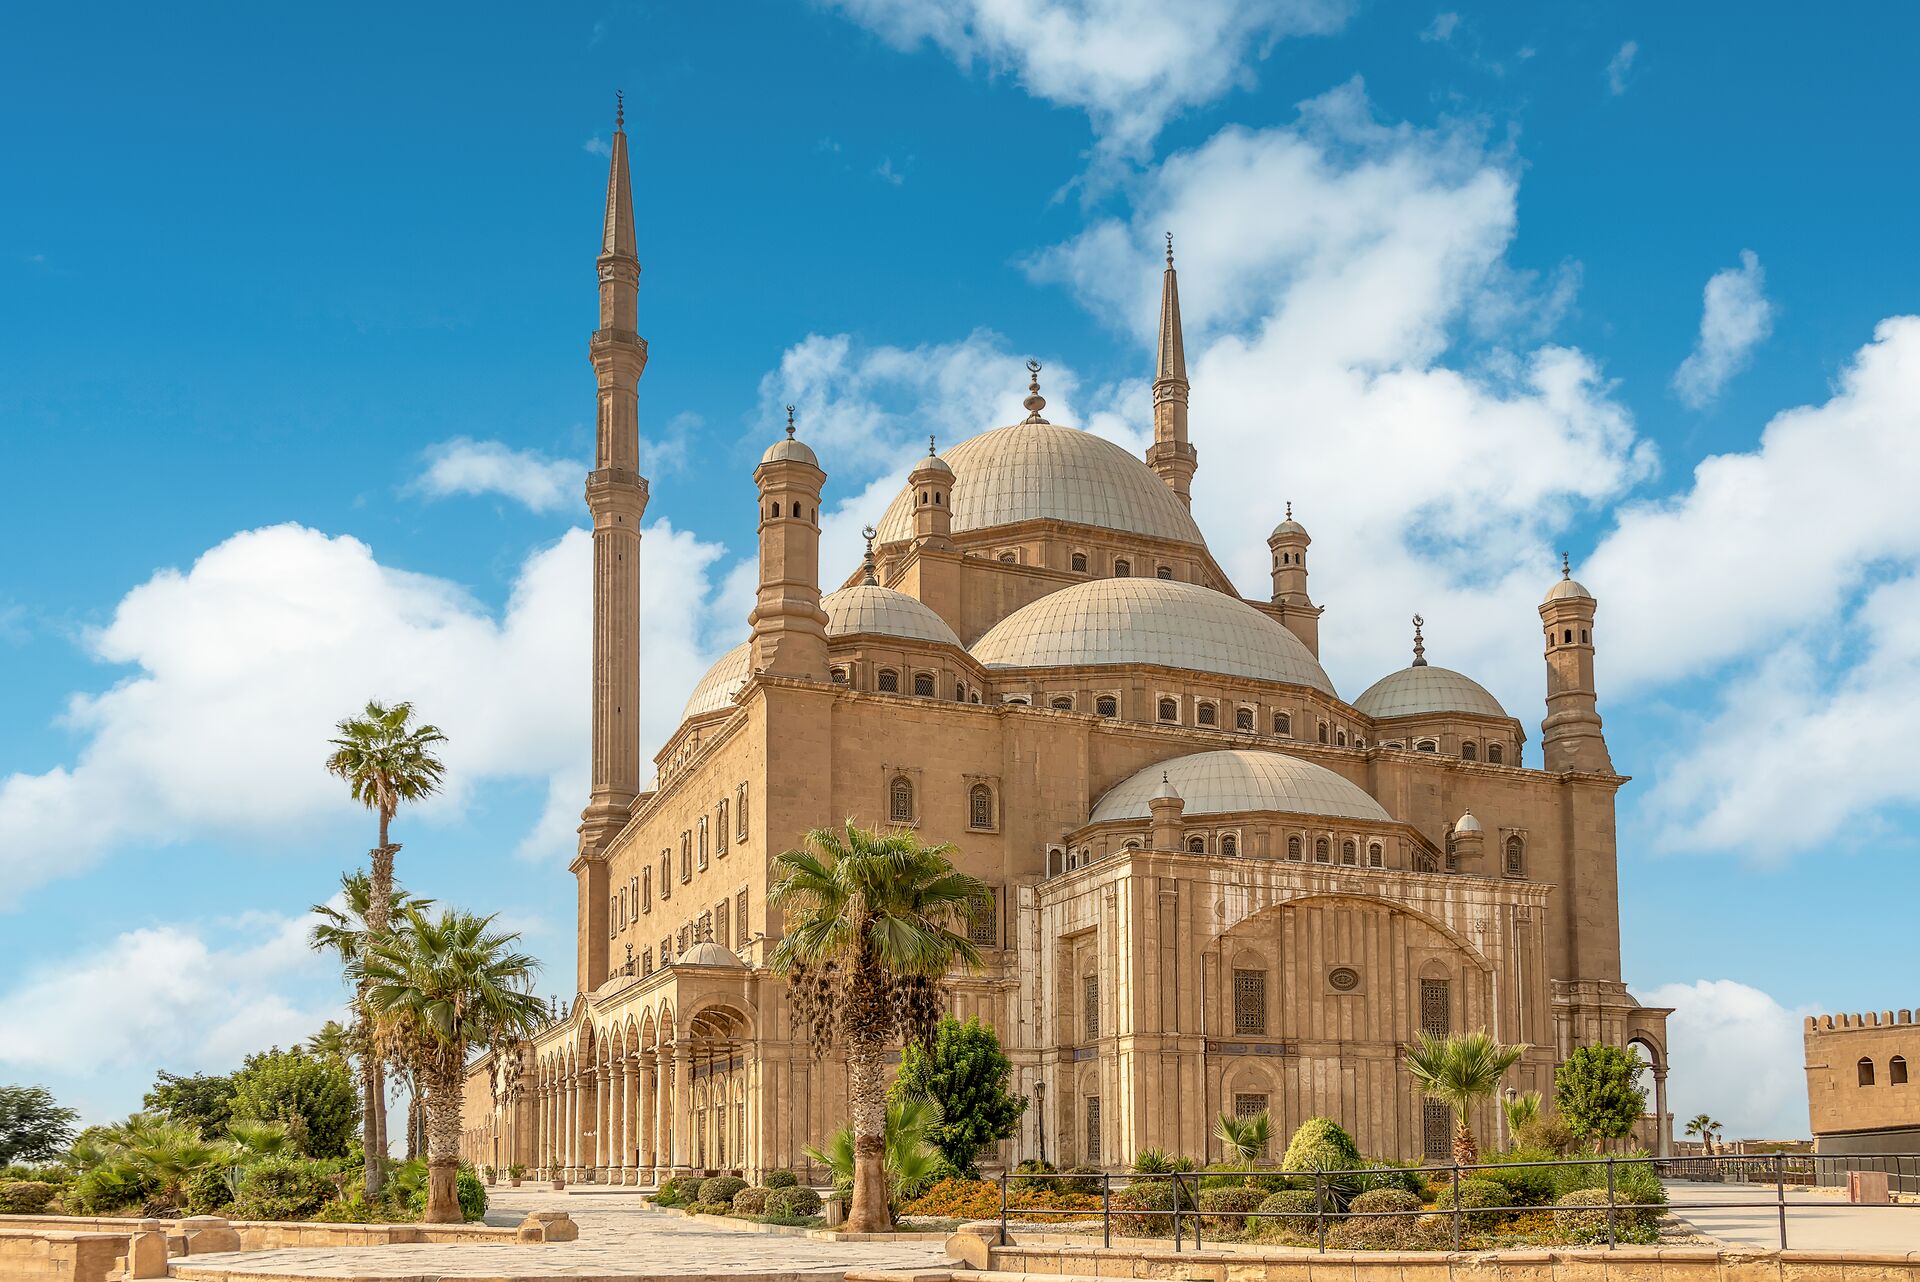 Mosque of Muhammad Ali, Cairo, Egypt against a bright blue sky, showing the detailed architecture